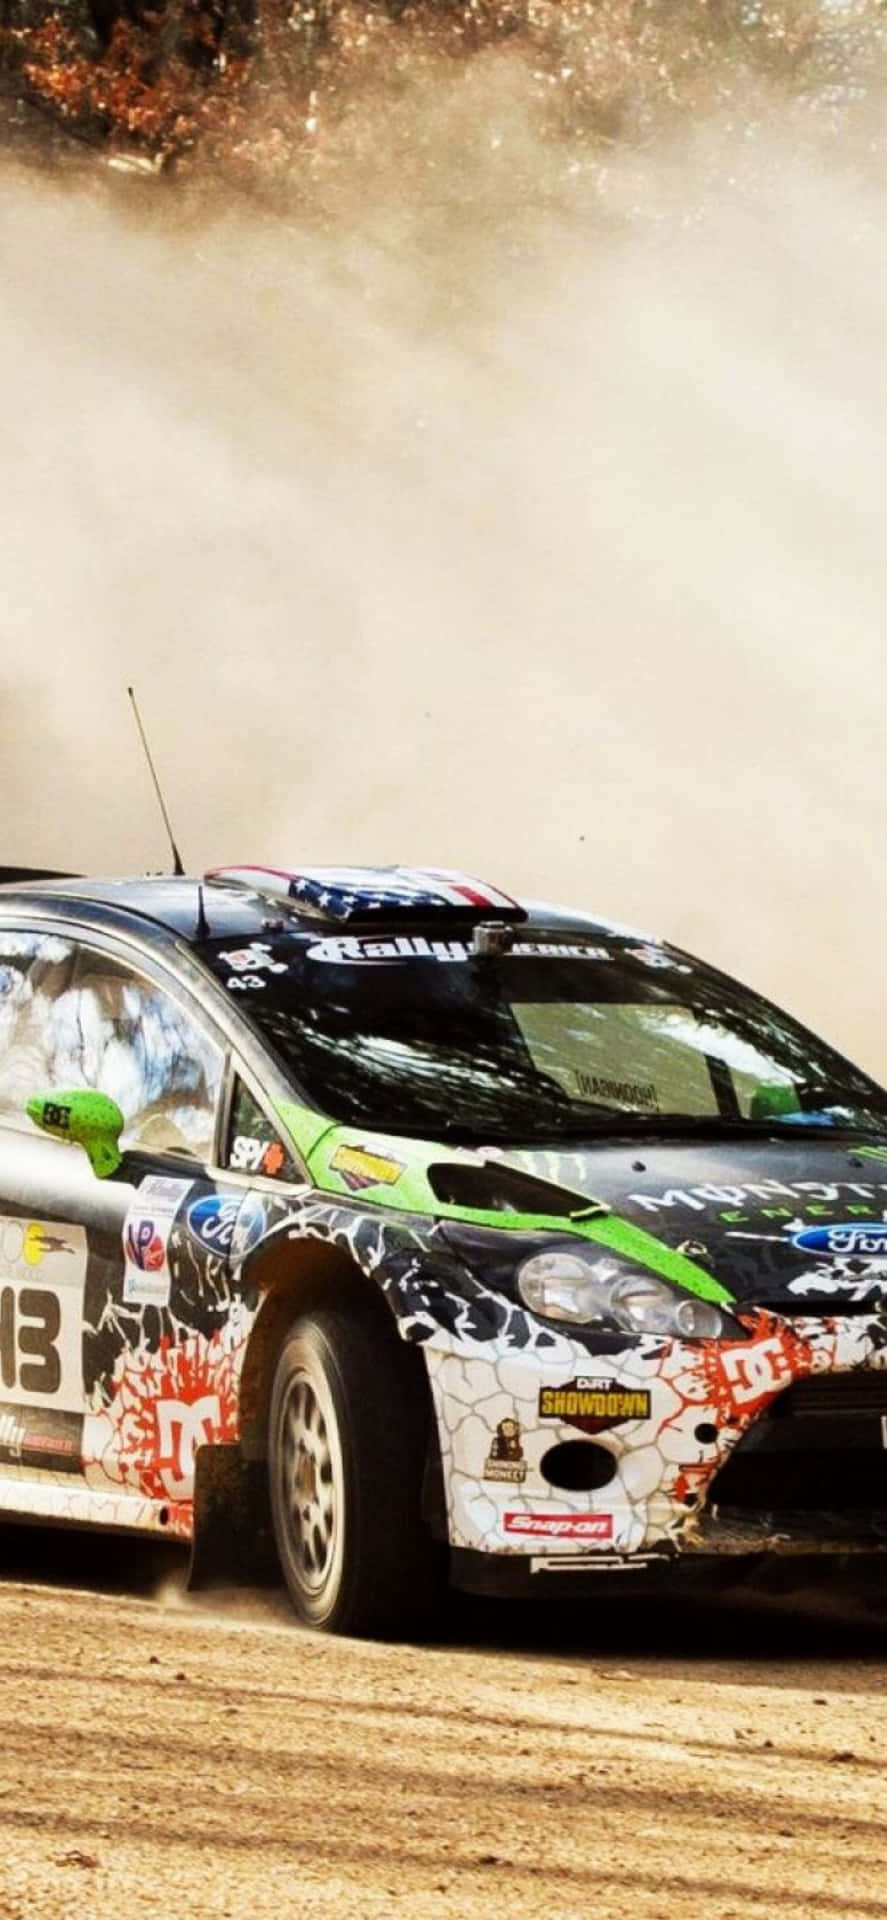 Take Your Autosports dreams to new levels with Iphone Xs and Dirt Rally